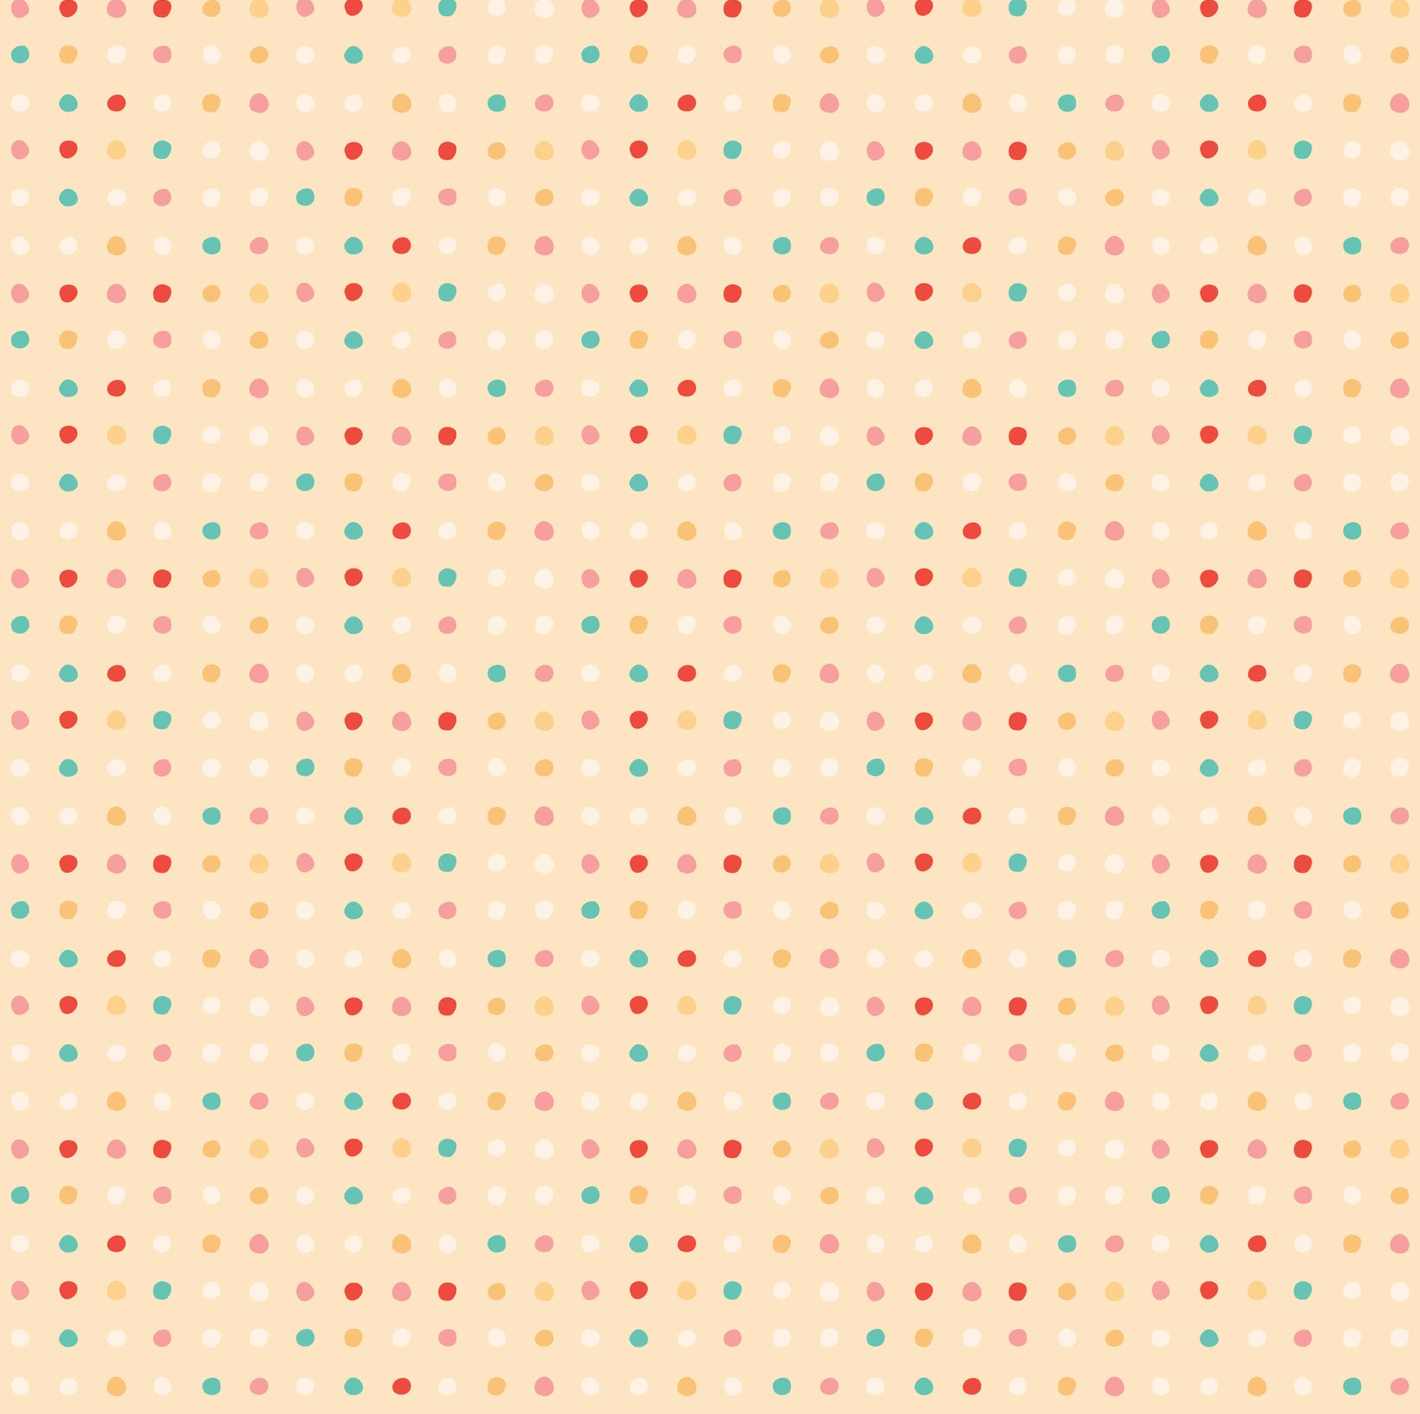 Mushroom Blooms, Polkie Dots Cream, MB24406, sold by the 1/2 yard, *PREORDER